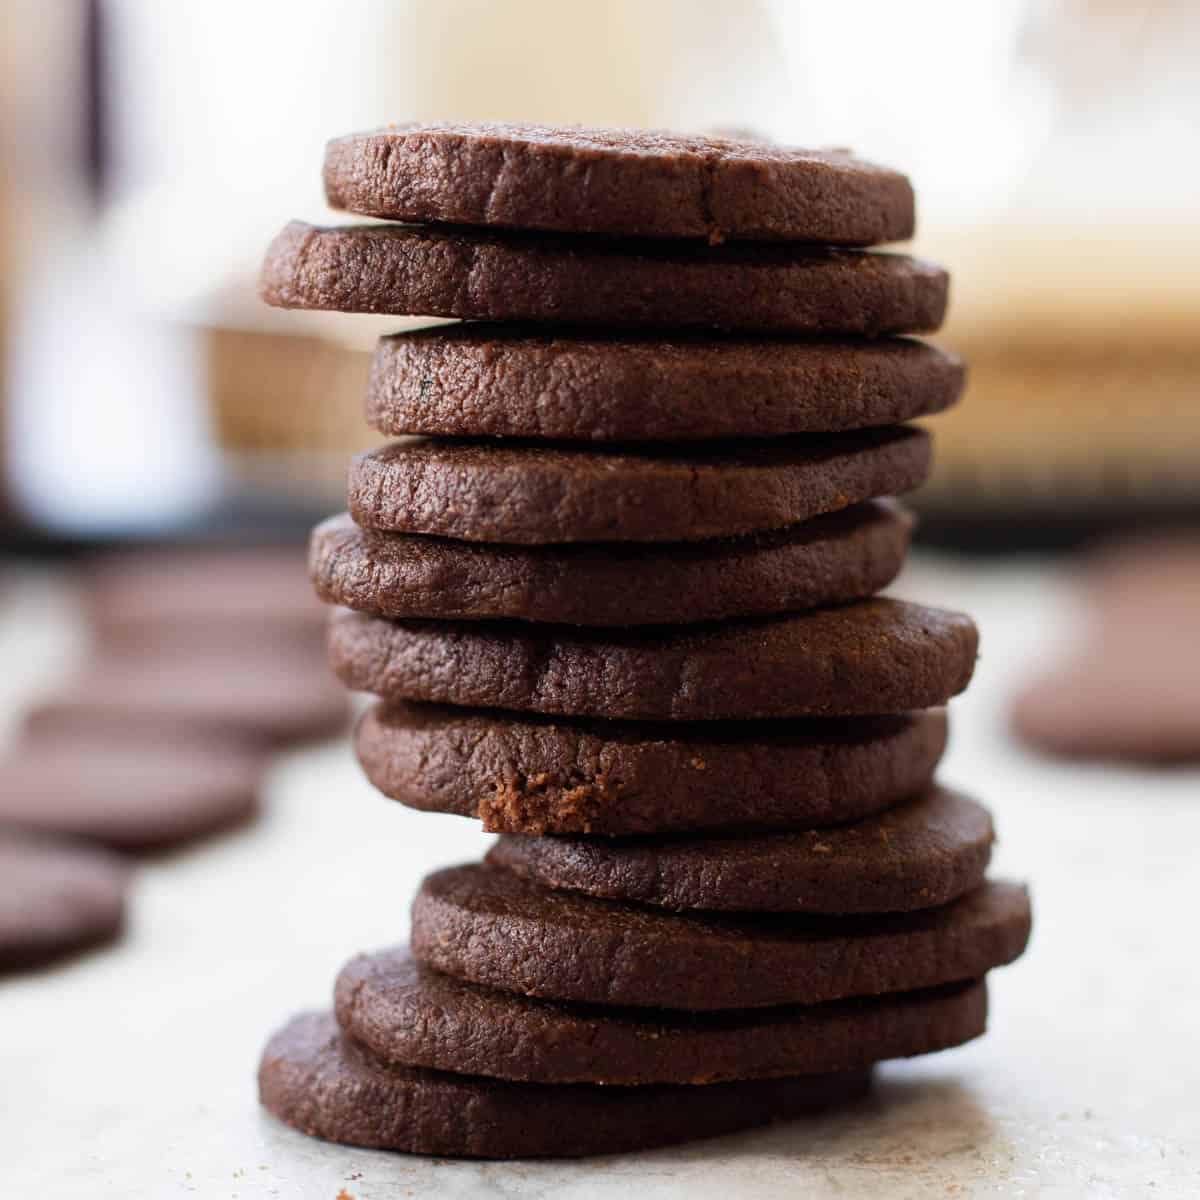 a stack of cocoa powder cookies